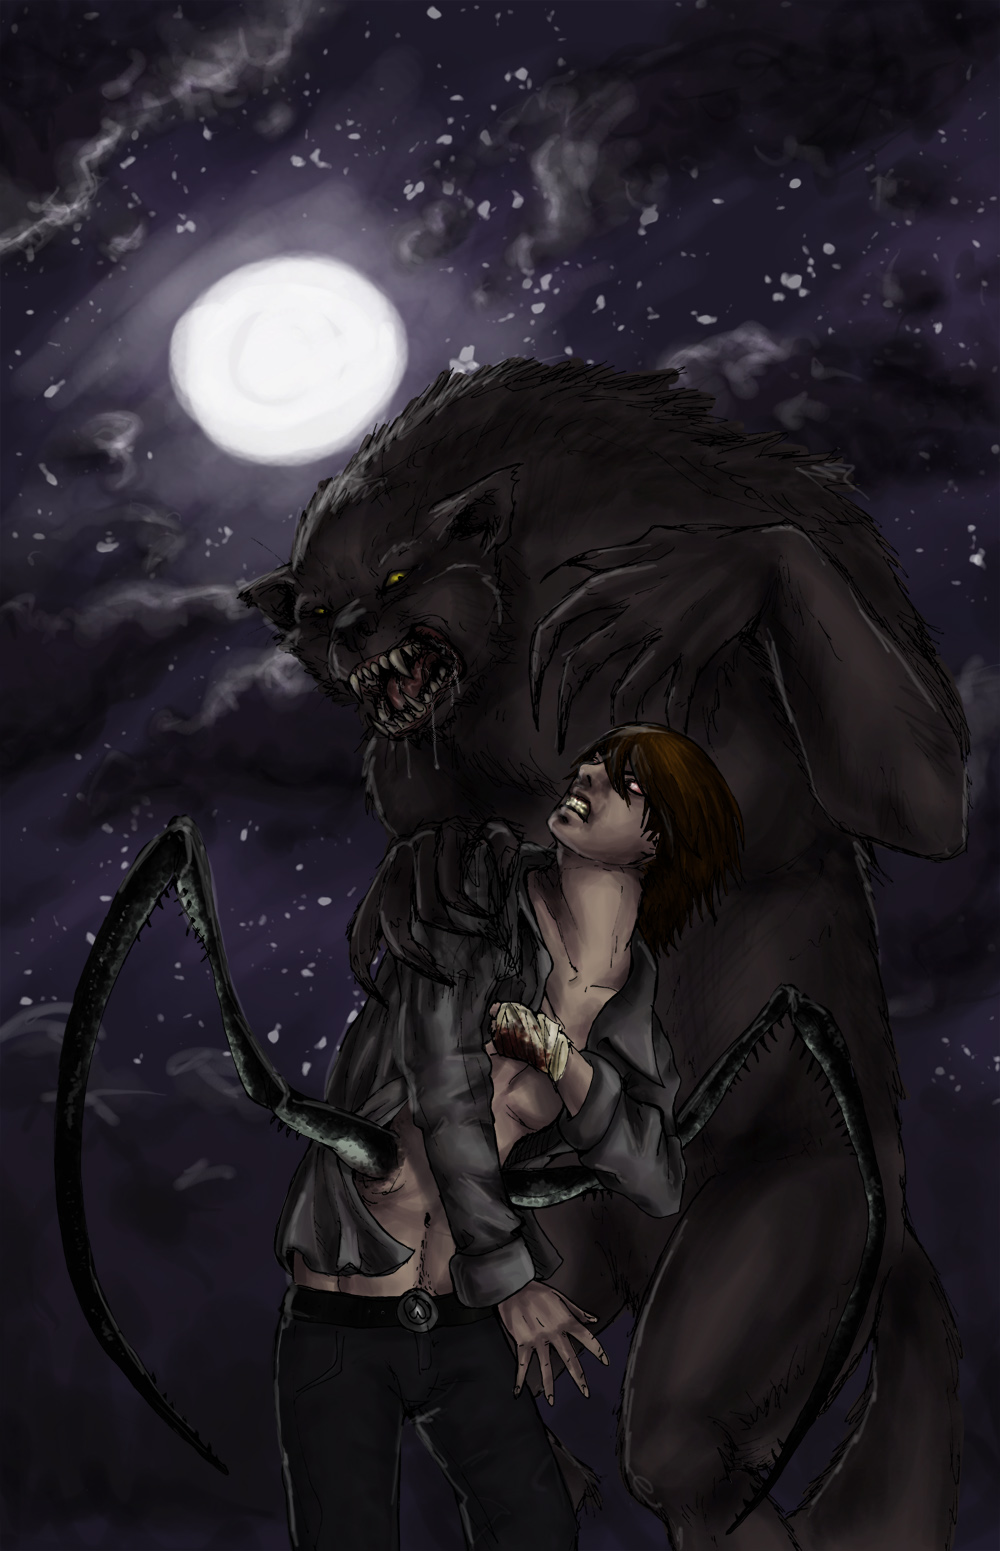 Garm and the werewolf by Fisi